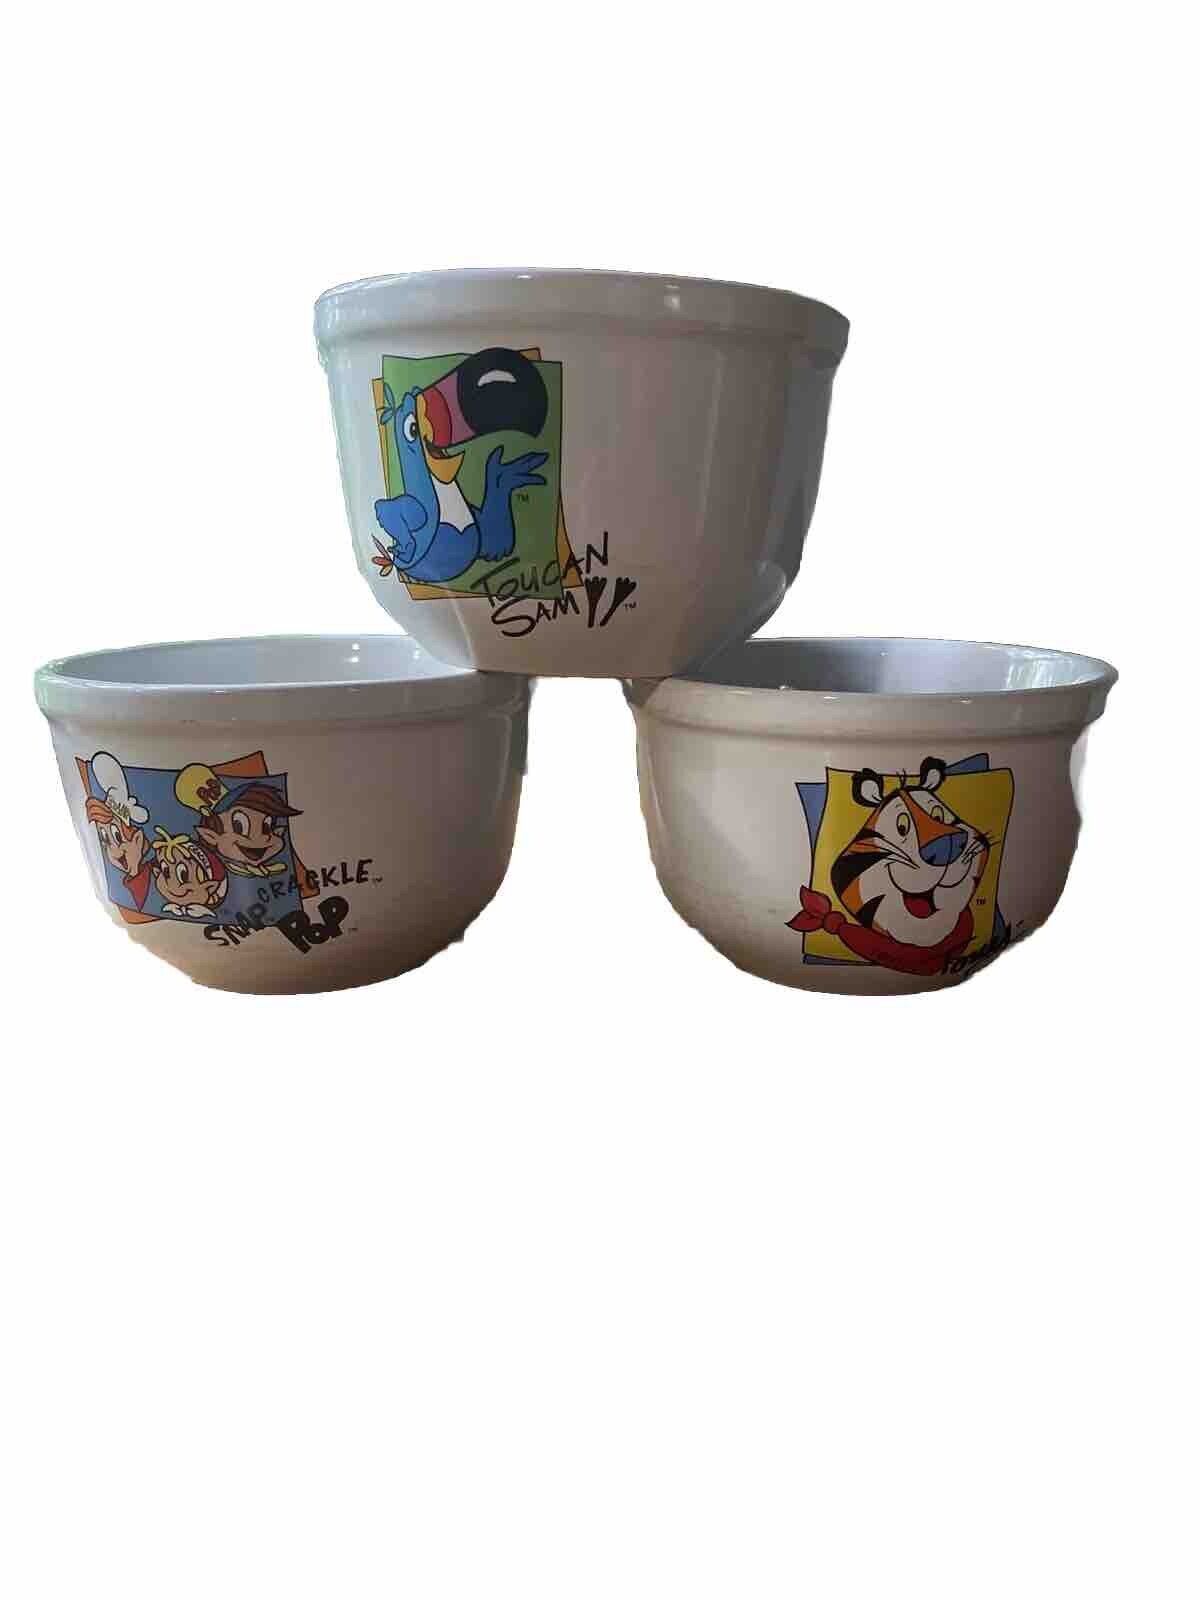 Vintage Kellogg's Cereal Bowls Frosted Flakes Froot Loops Rice Krispies Y2K 2001